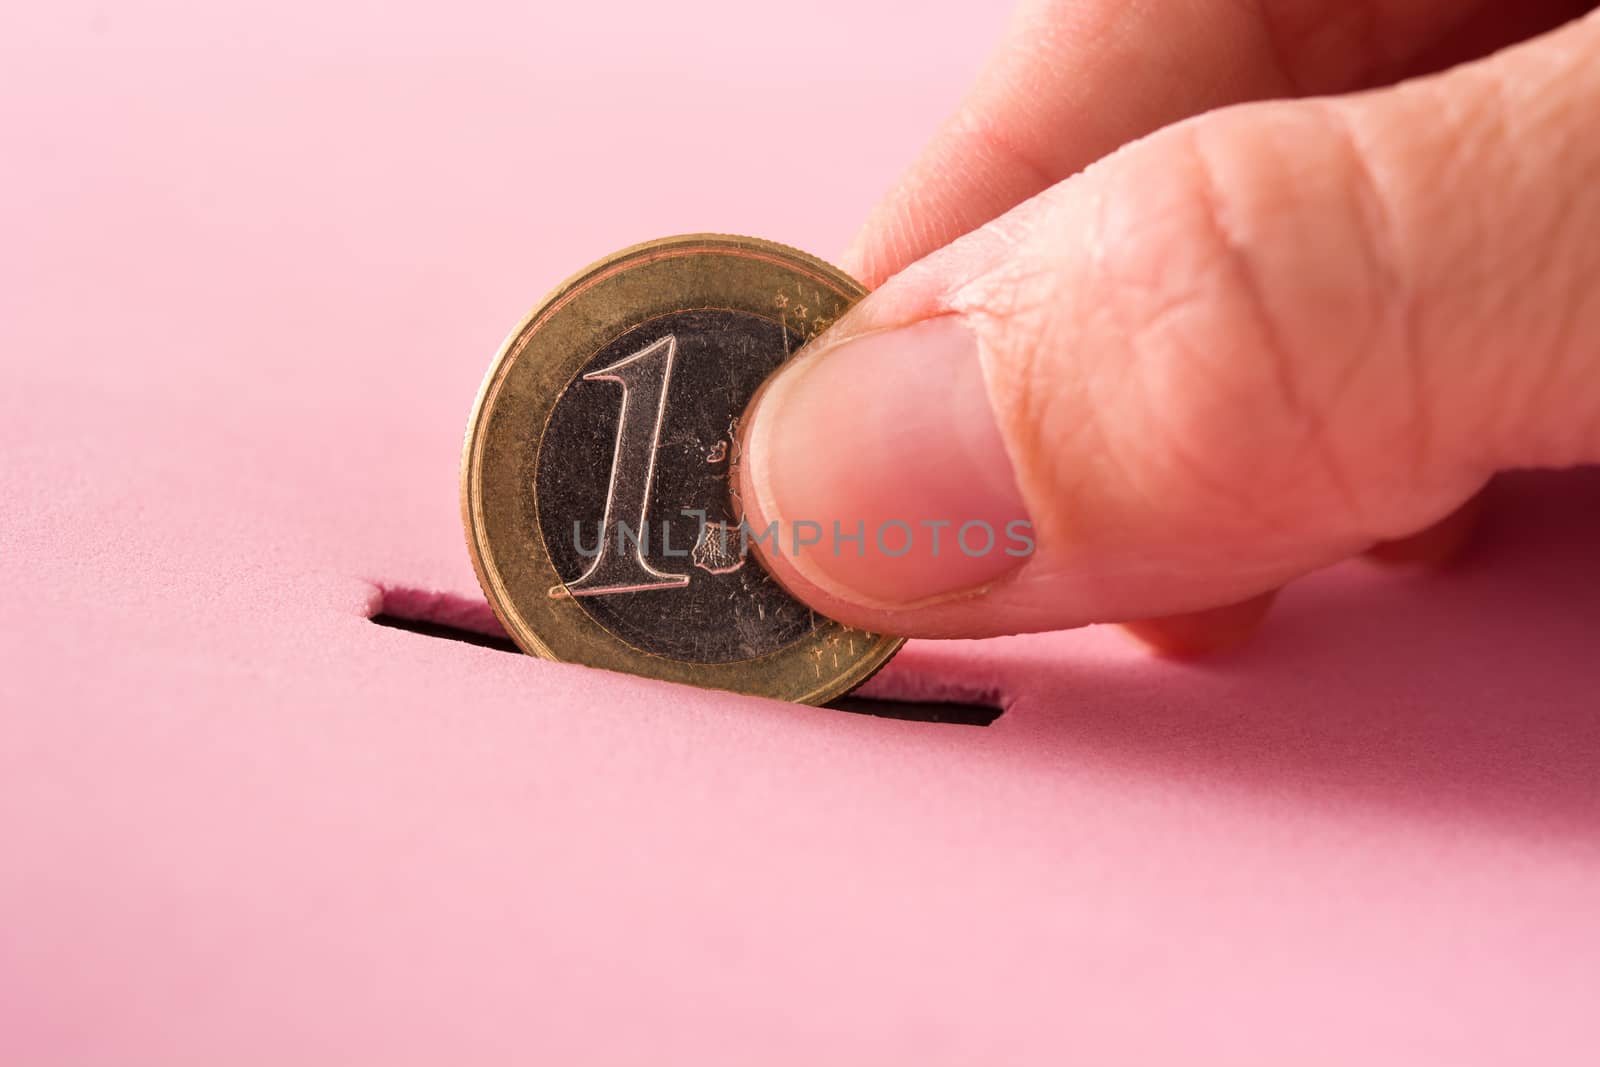 Hand putting one euro coin into a moneybox on pink background